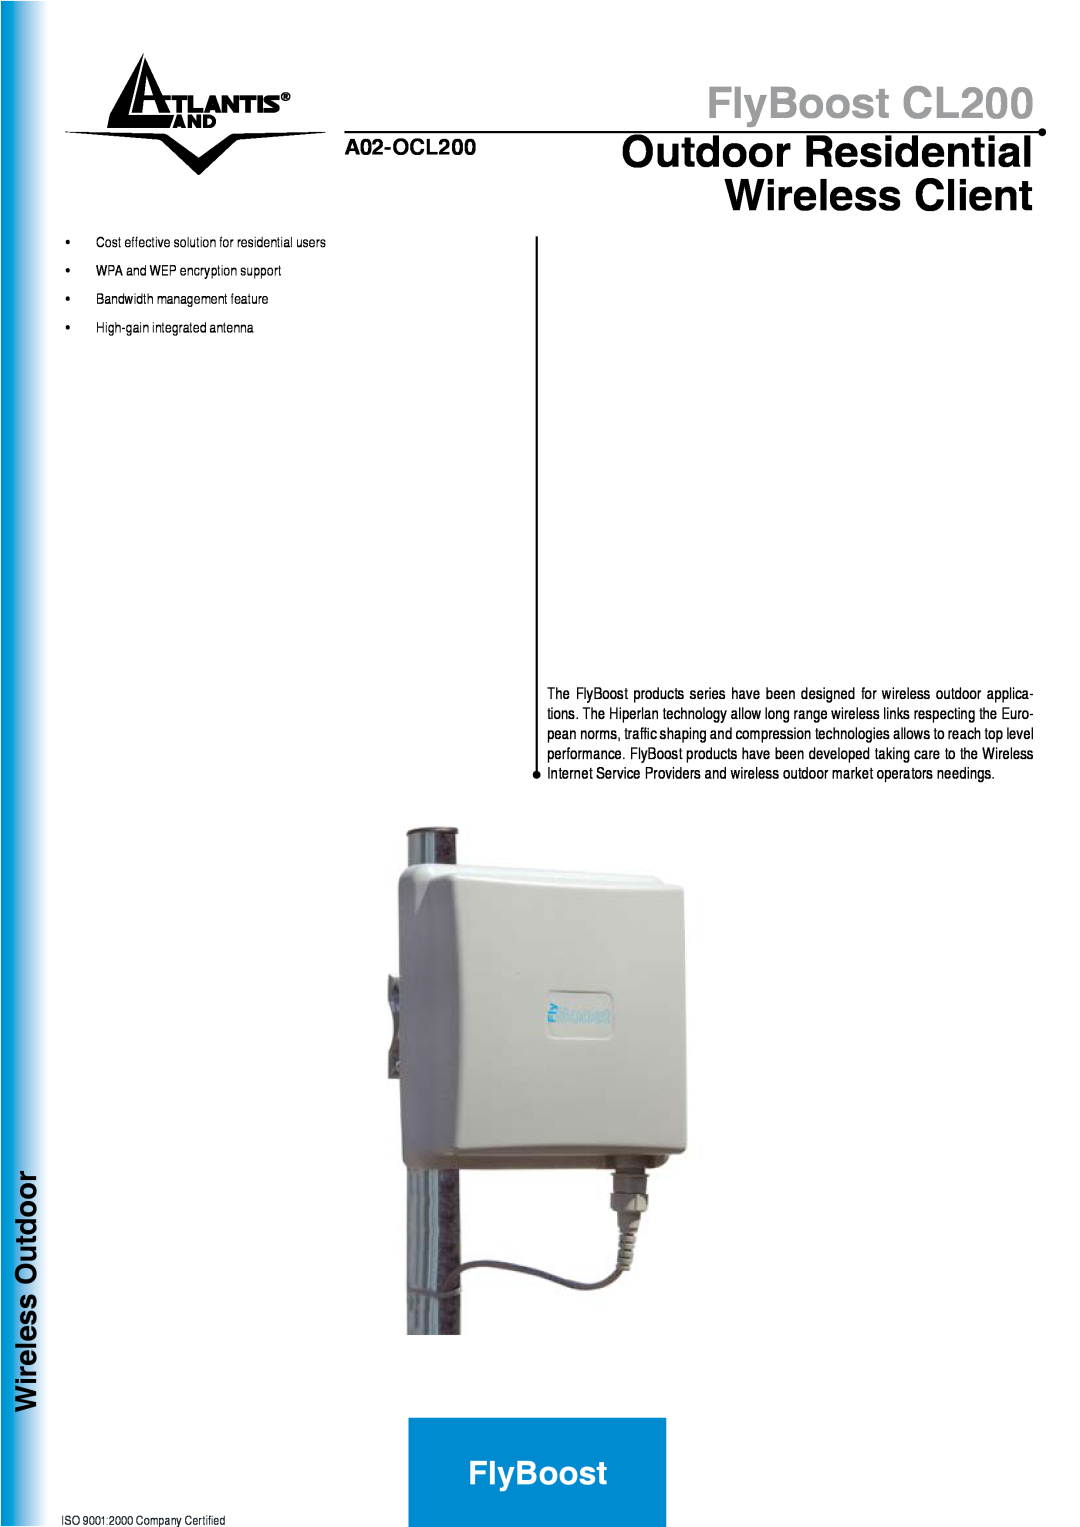 Atlantis Land A02-OCL200 manual FlyBoost CL200, Wireless Client, Outdoor Residential, Wireless Outdoor 